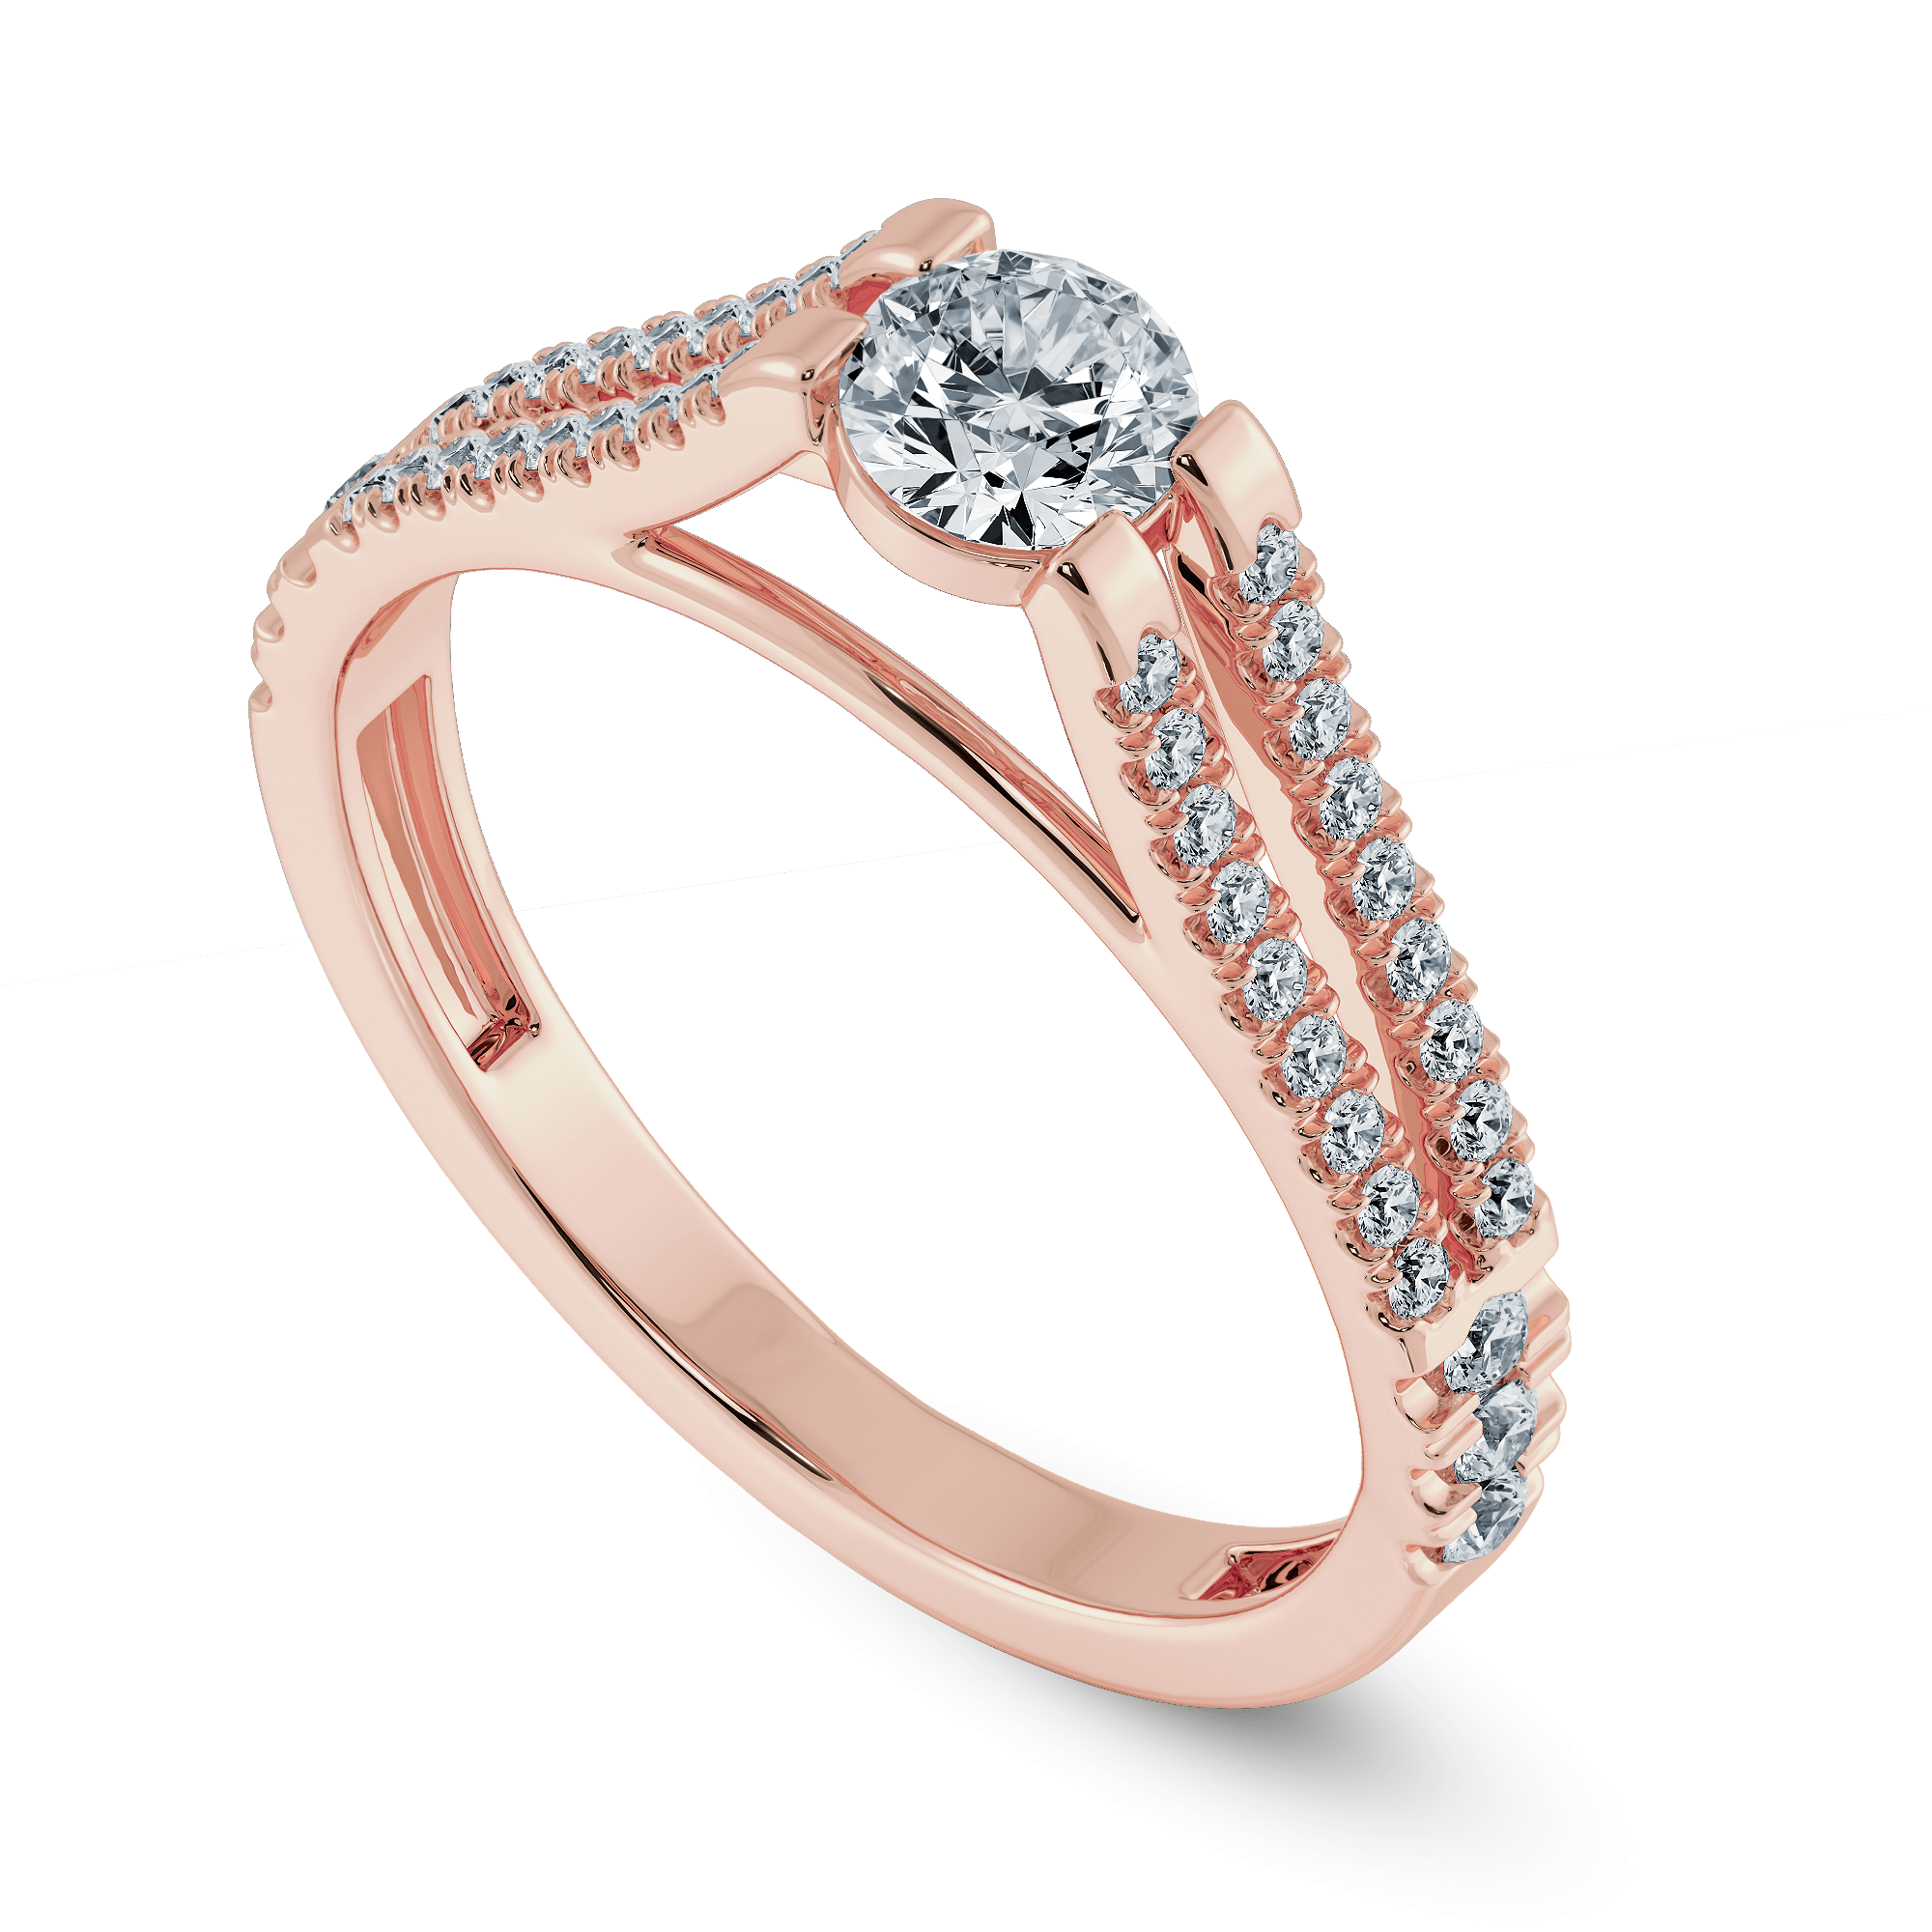 Rose Gold vs. Yellow Gold: Which Is Better for You?